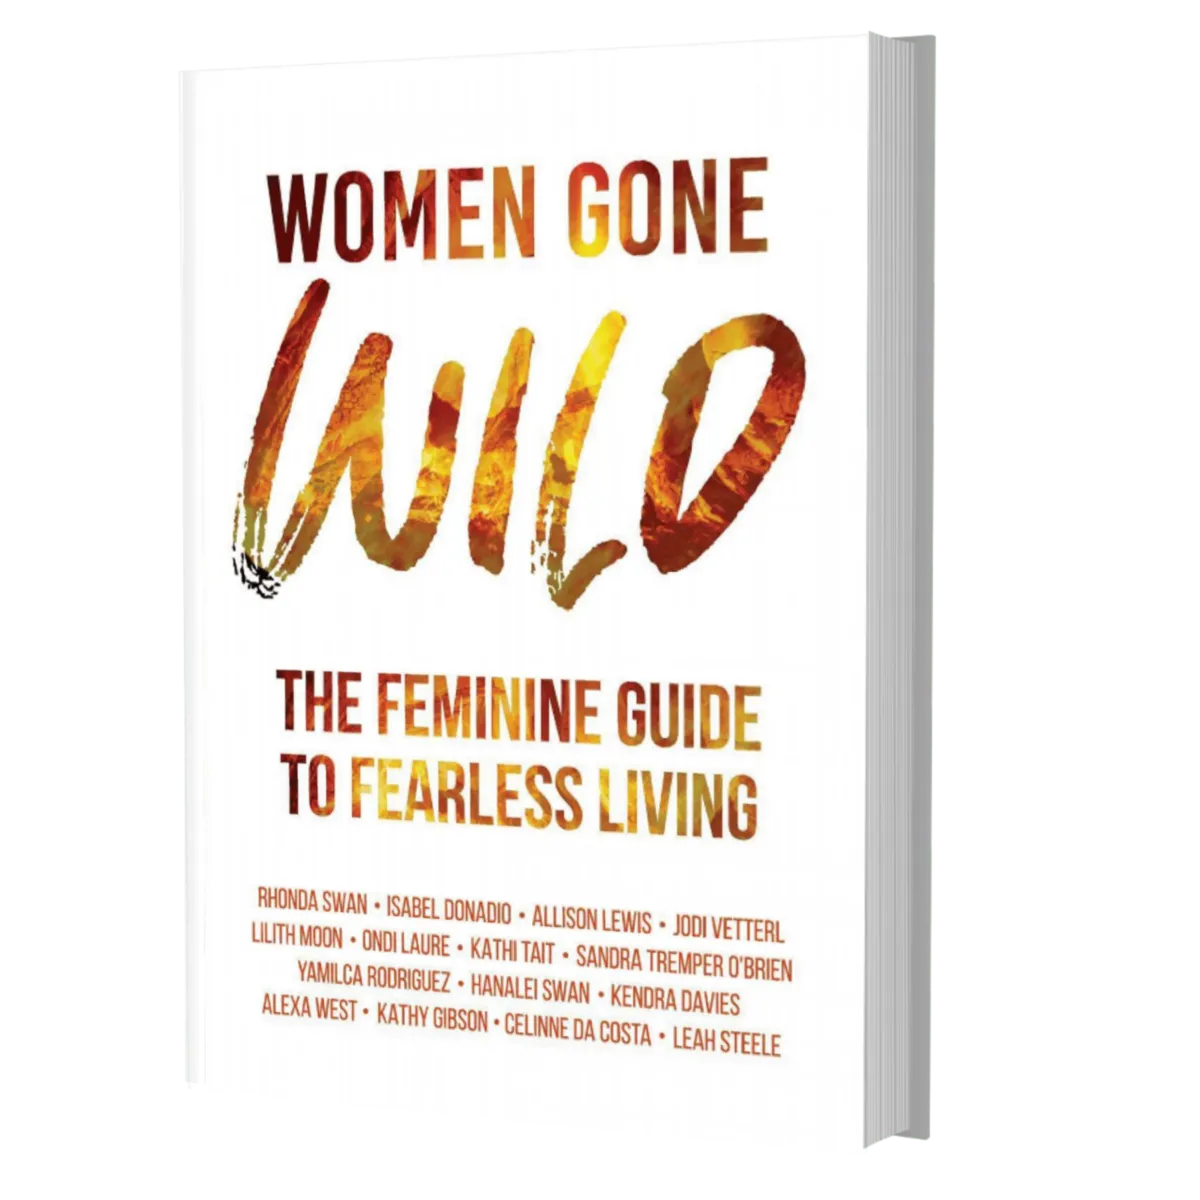 Women Gone Wild Hardcover - Autographed by Kathi